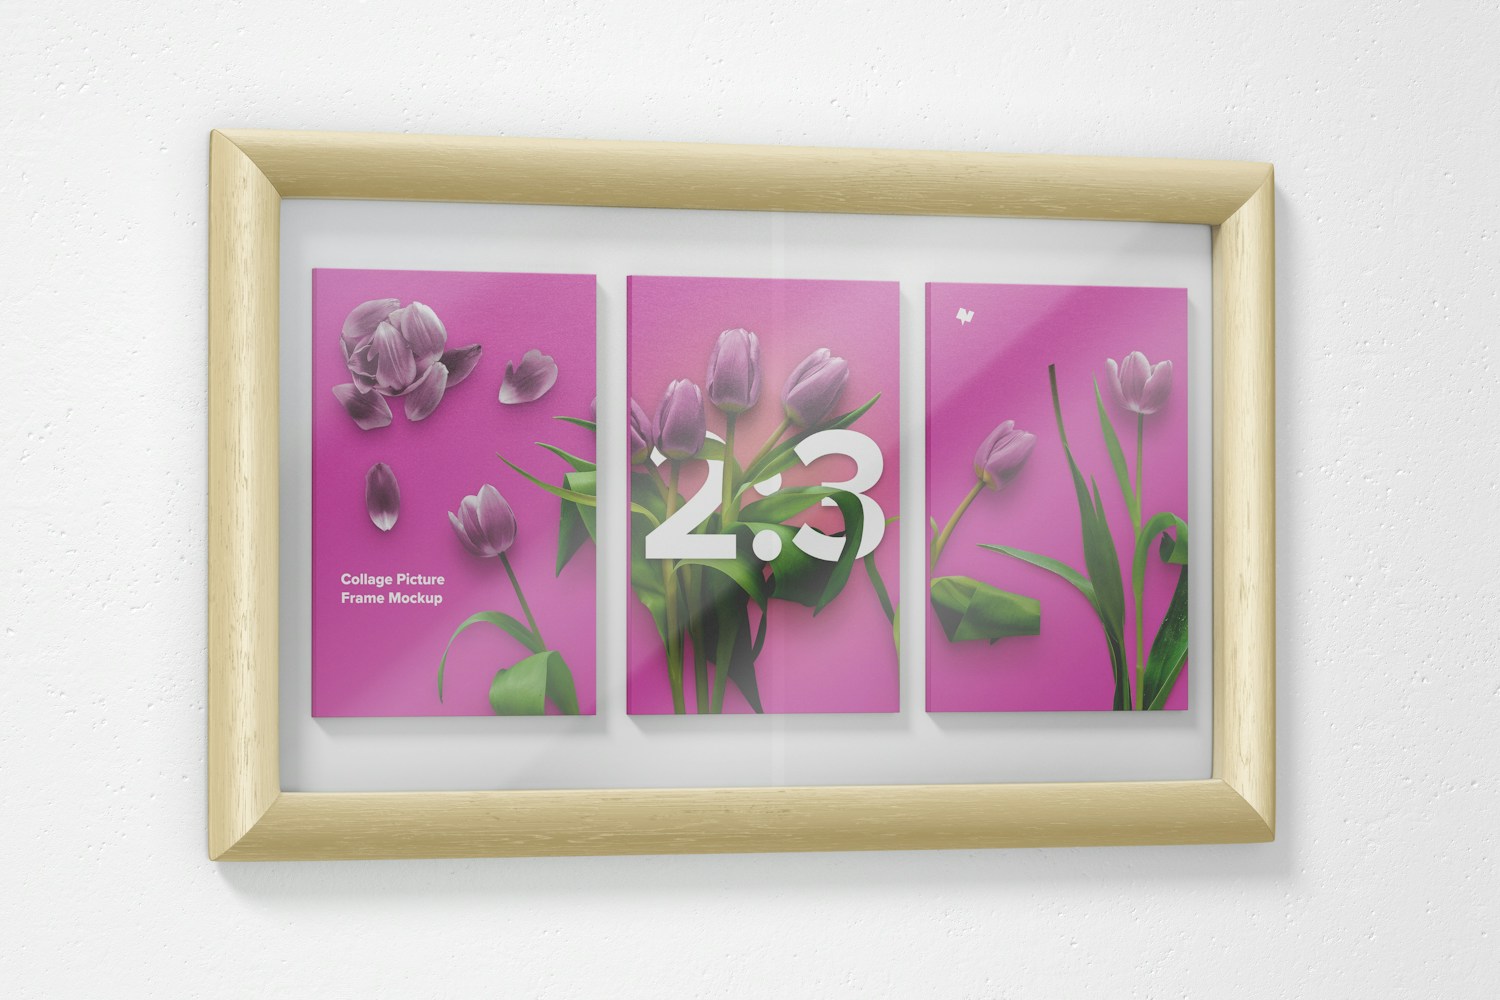 2:3 Collage Picture Frame Mockup, Left View